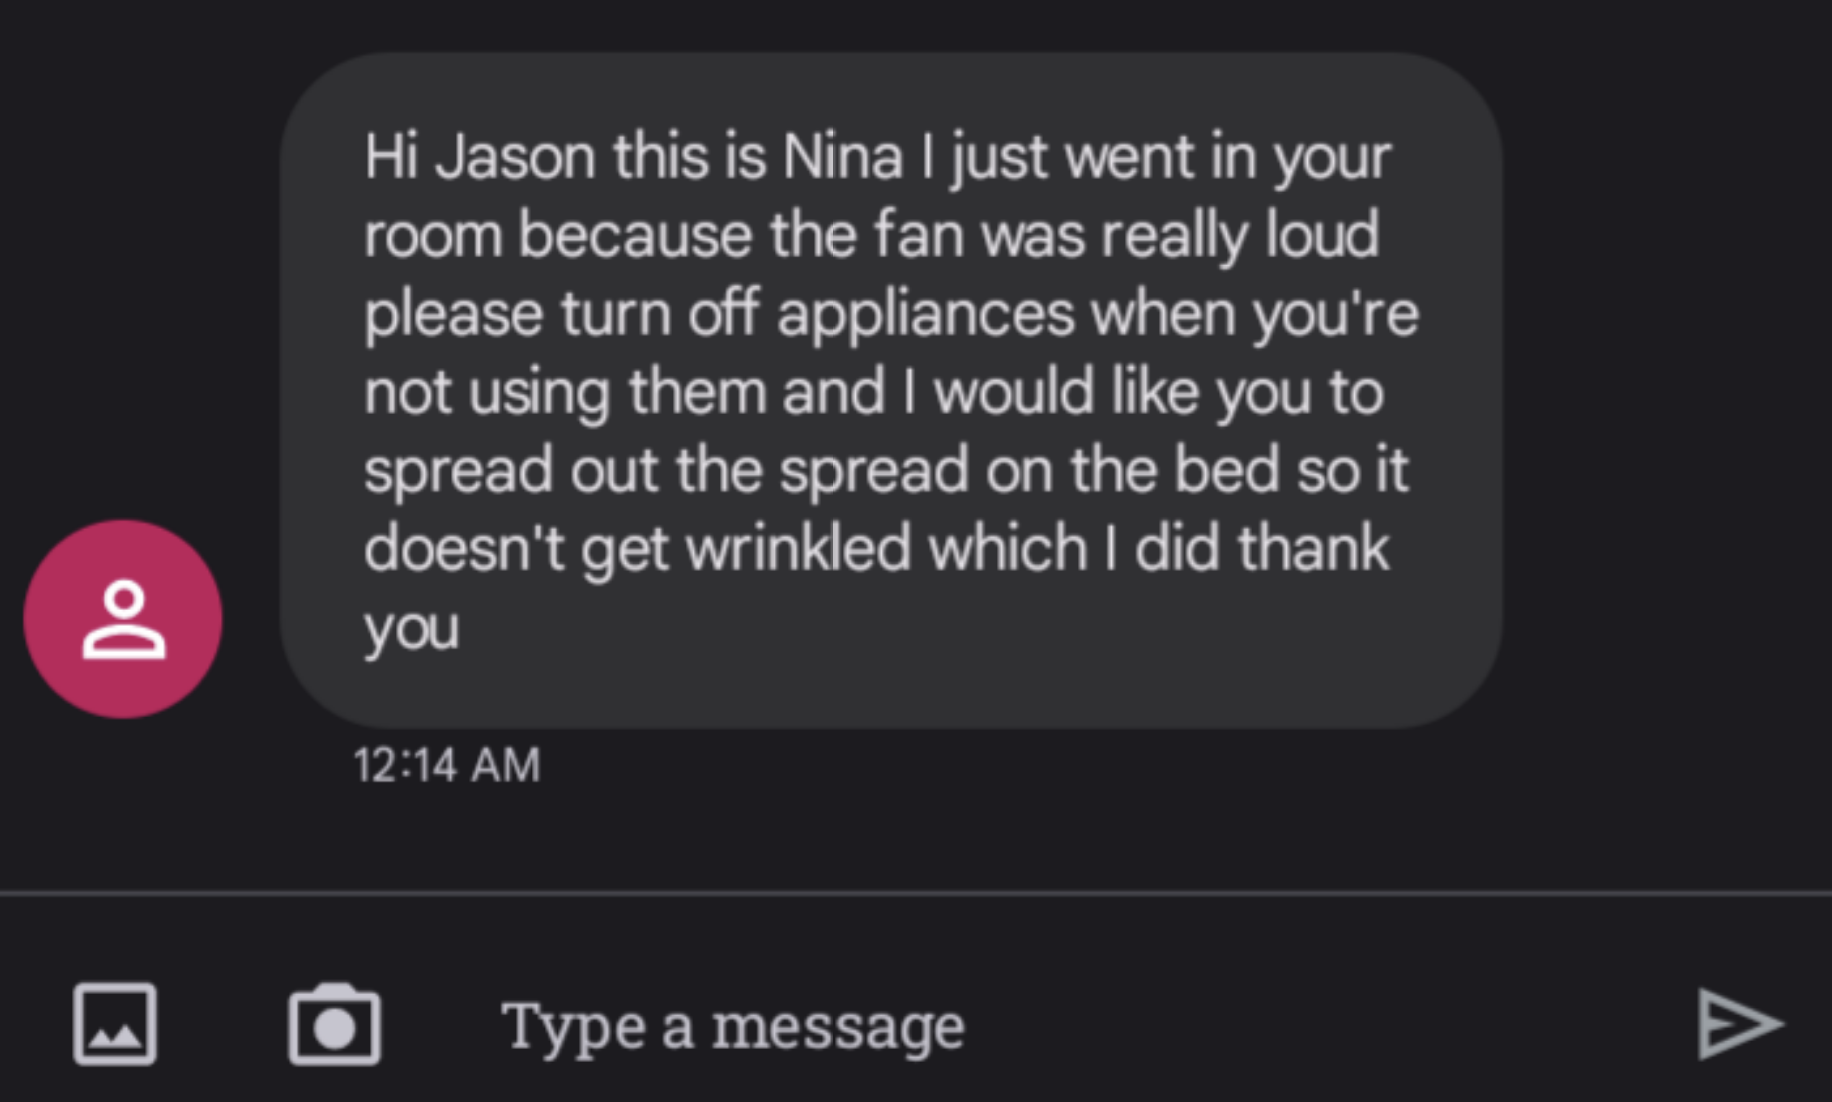 Text message on phone screen asking Jason to turn off fans in the room to prevent clothes from wrinkling. Sent by Nina at 12:14 AM